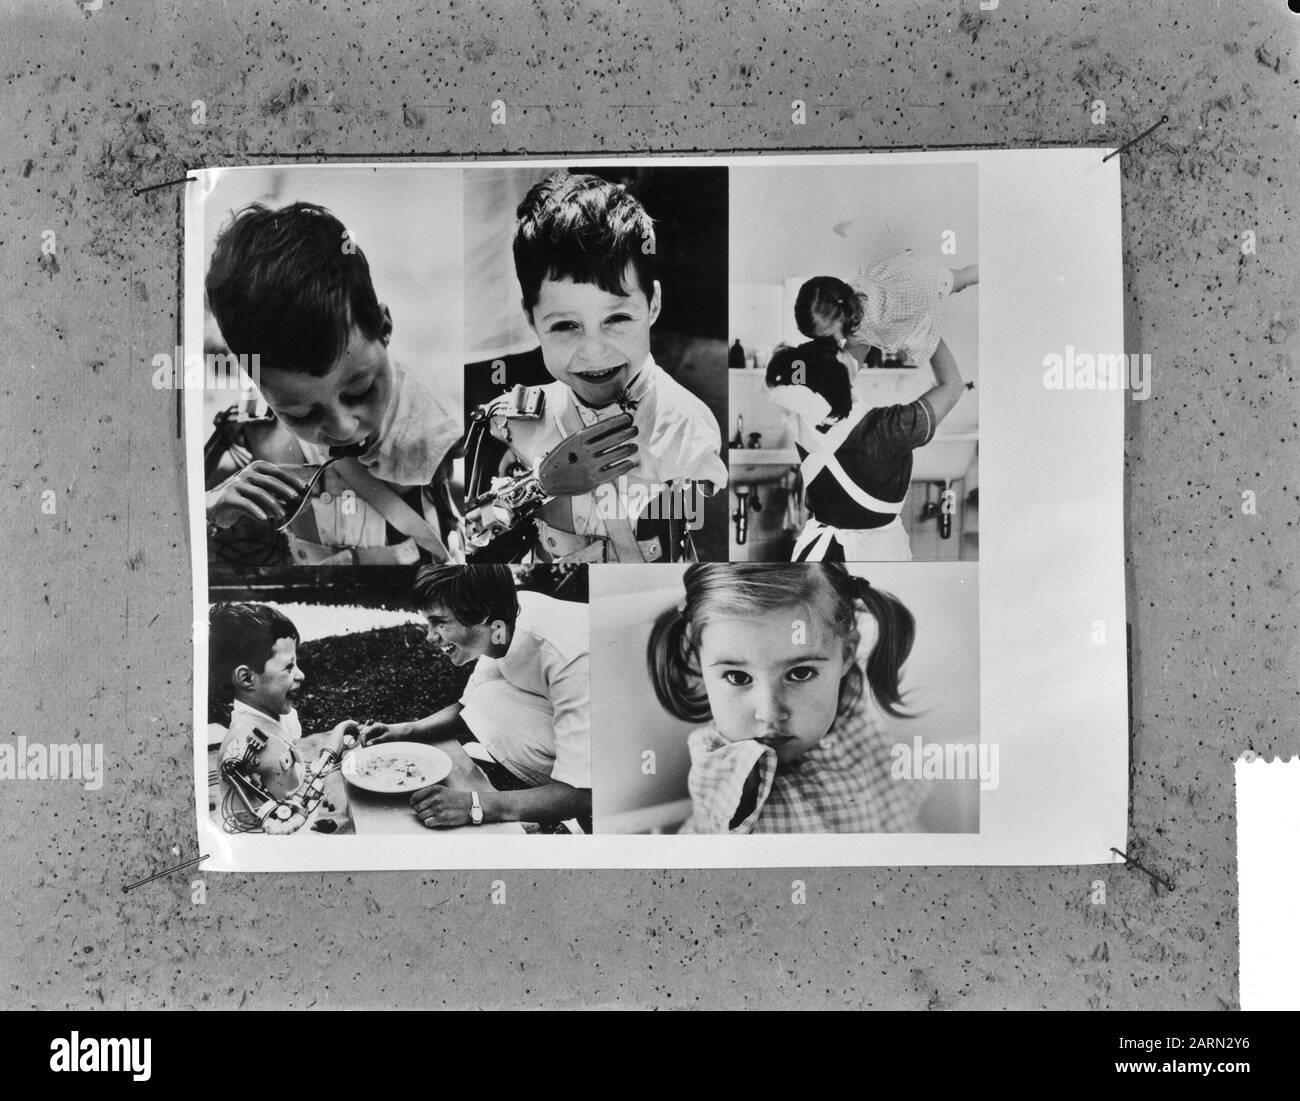 1965 Press Photo Fashion Designer Marc Bohan Surrounded by